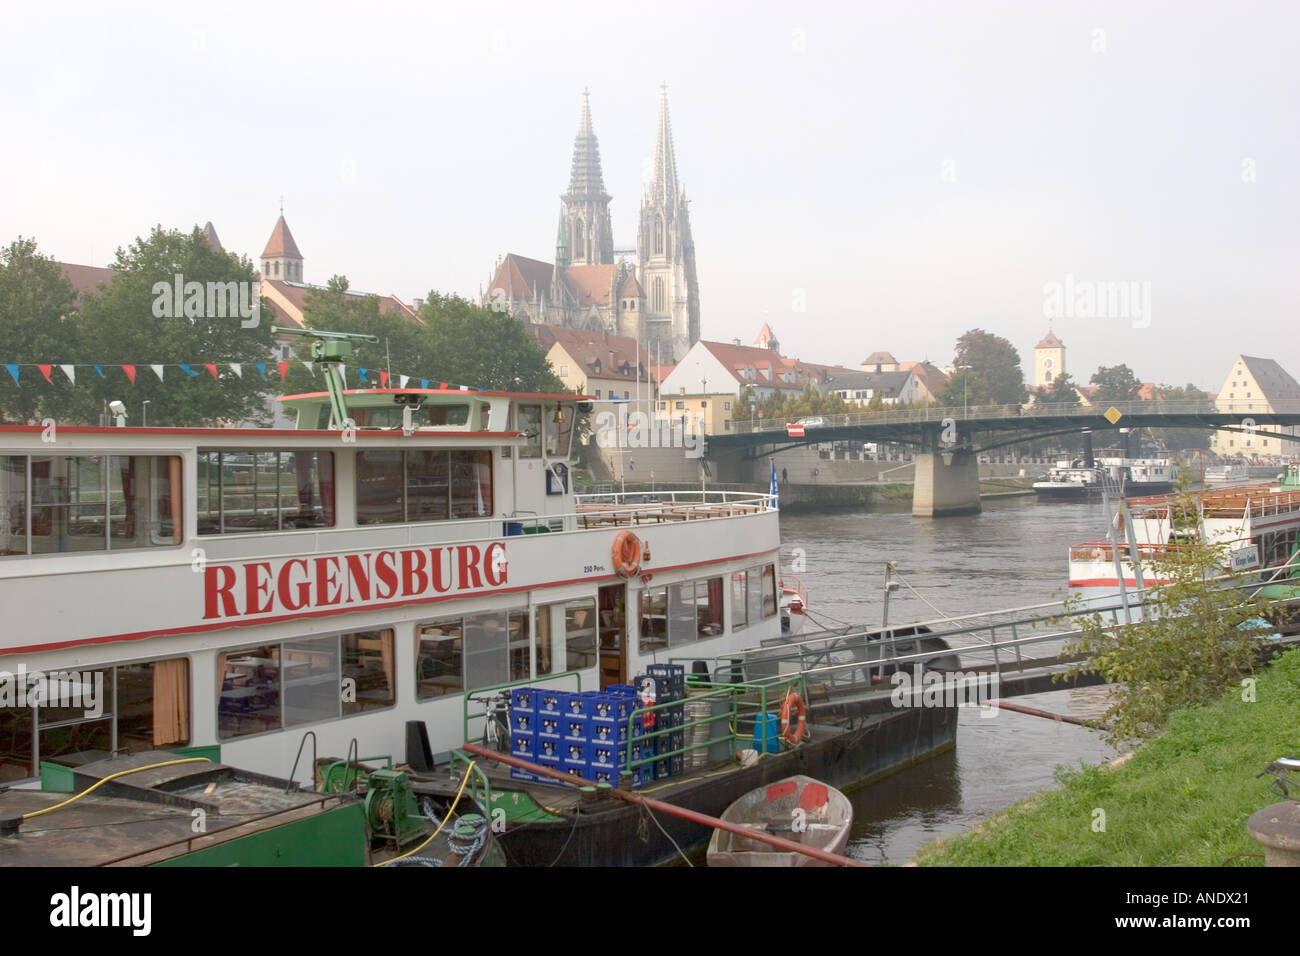 A tourist cruise boat preparing for the day at the ancient city of Regensburg on the Danube River Germany Western Europe Stock Photo